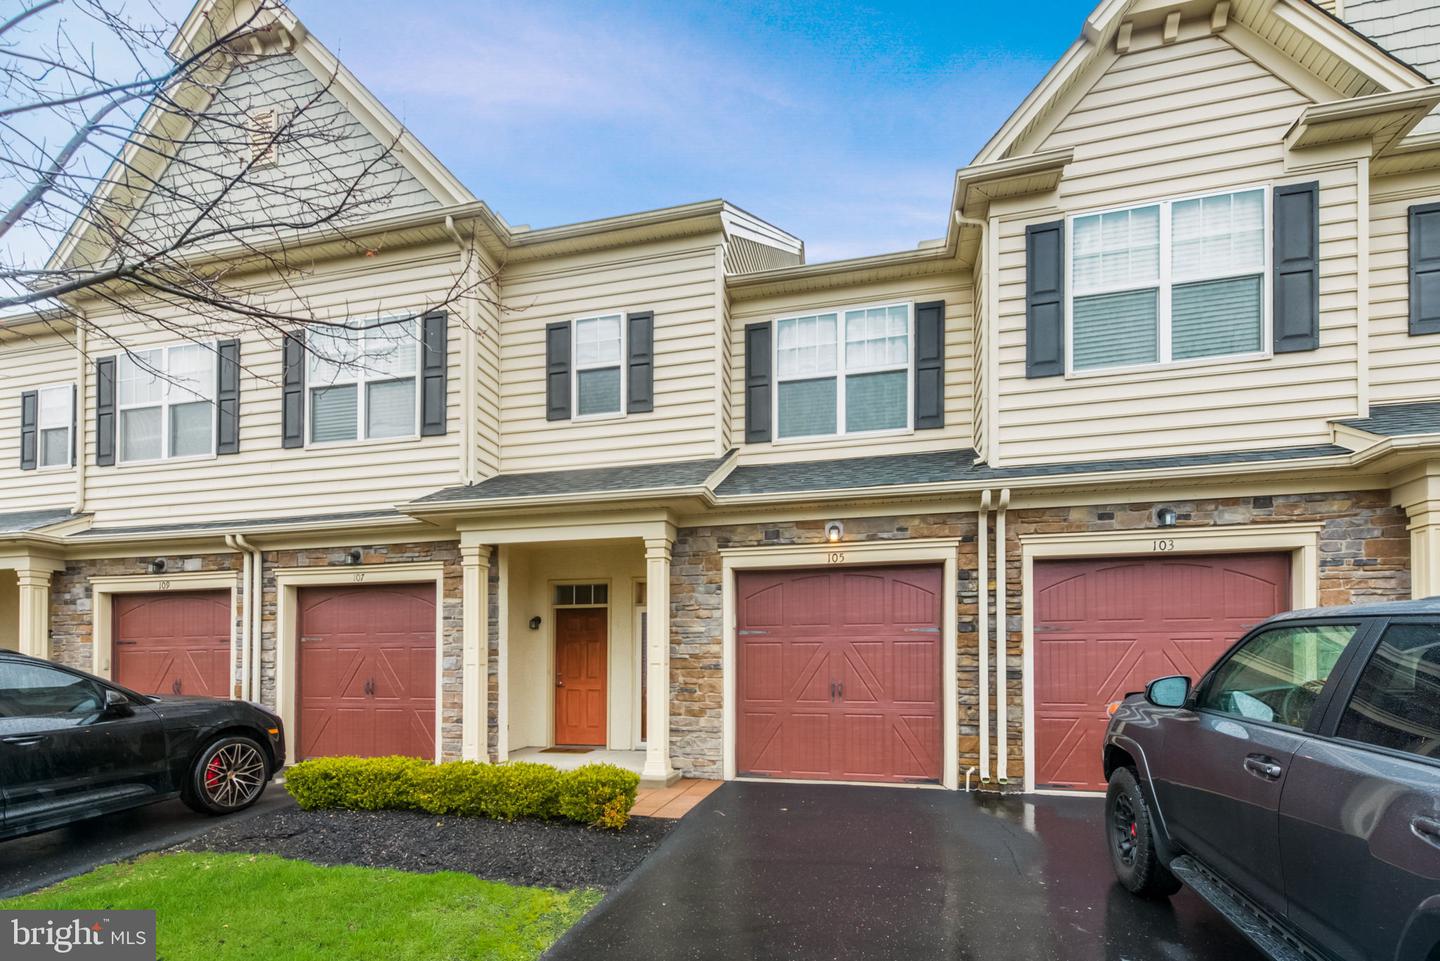 View Norristown, PA 19401 townhome